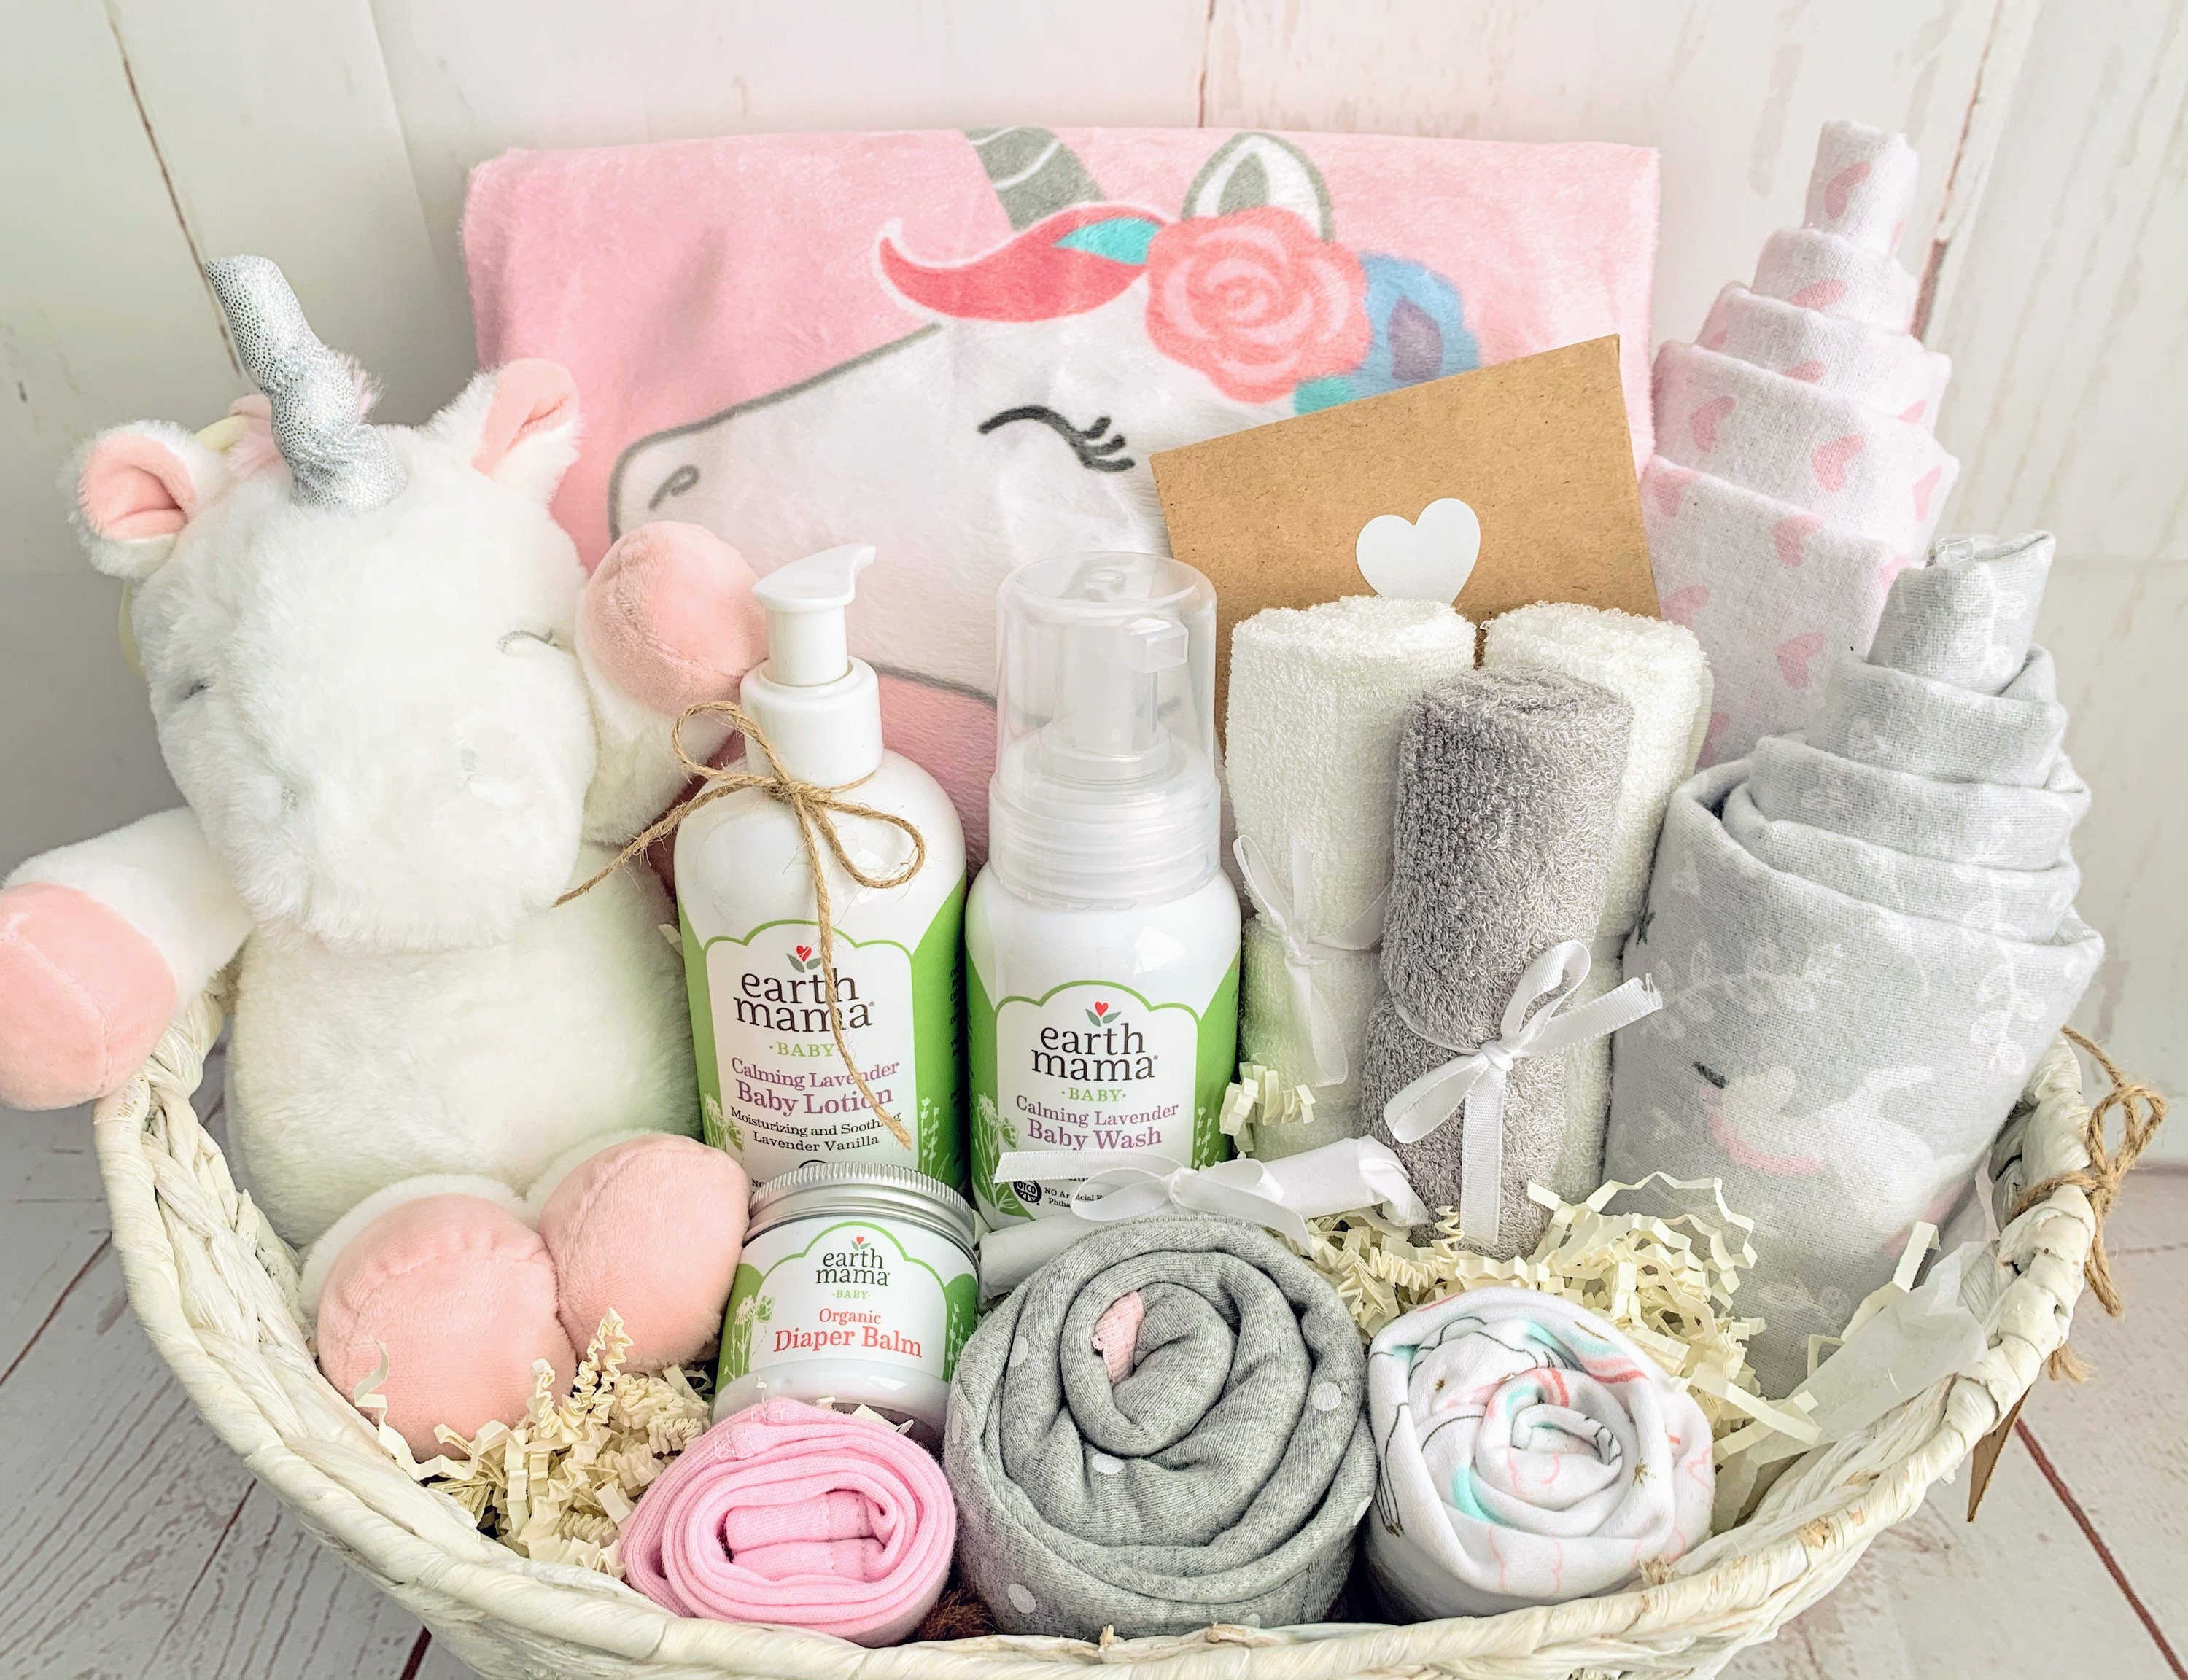 Our Green House Mommy and Baby Gifts Idea - Baskets for Girl - Pink - Mom and Newborn - Pamper - Organic Cotton, High End, Luxury - Hamper, Basket or Box - Gift for